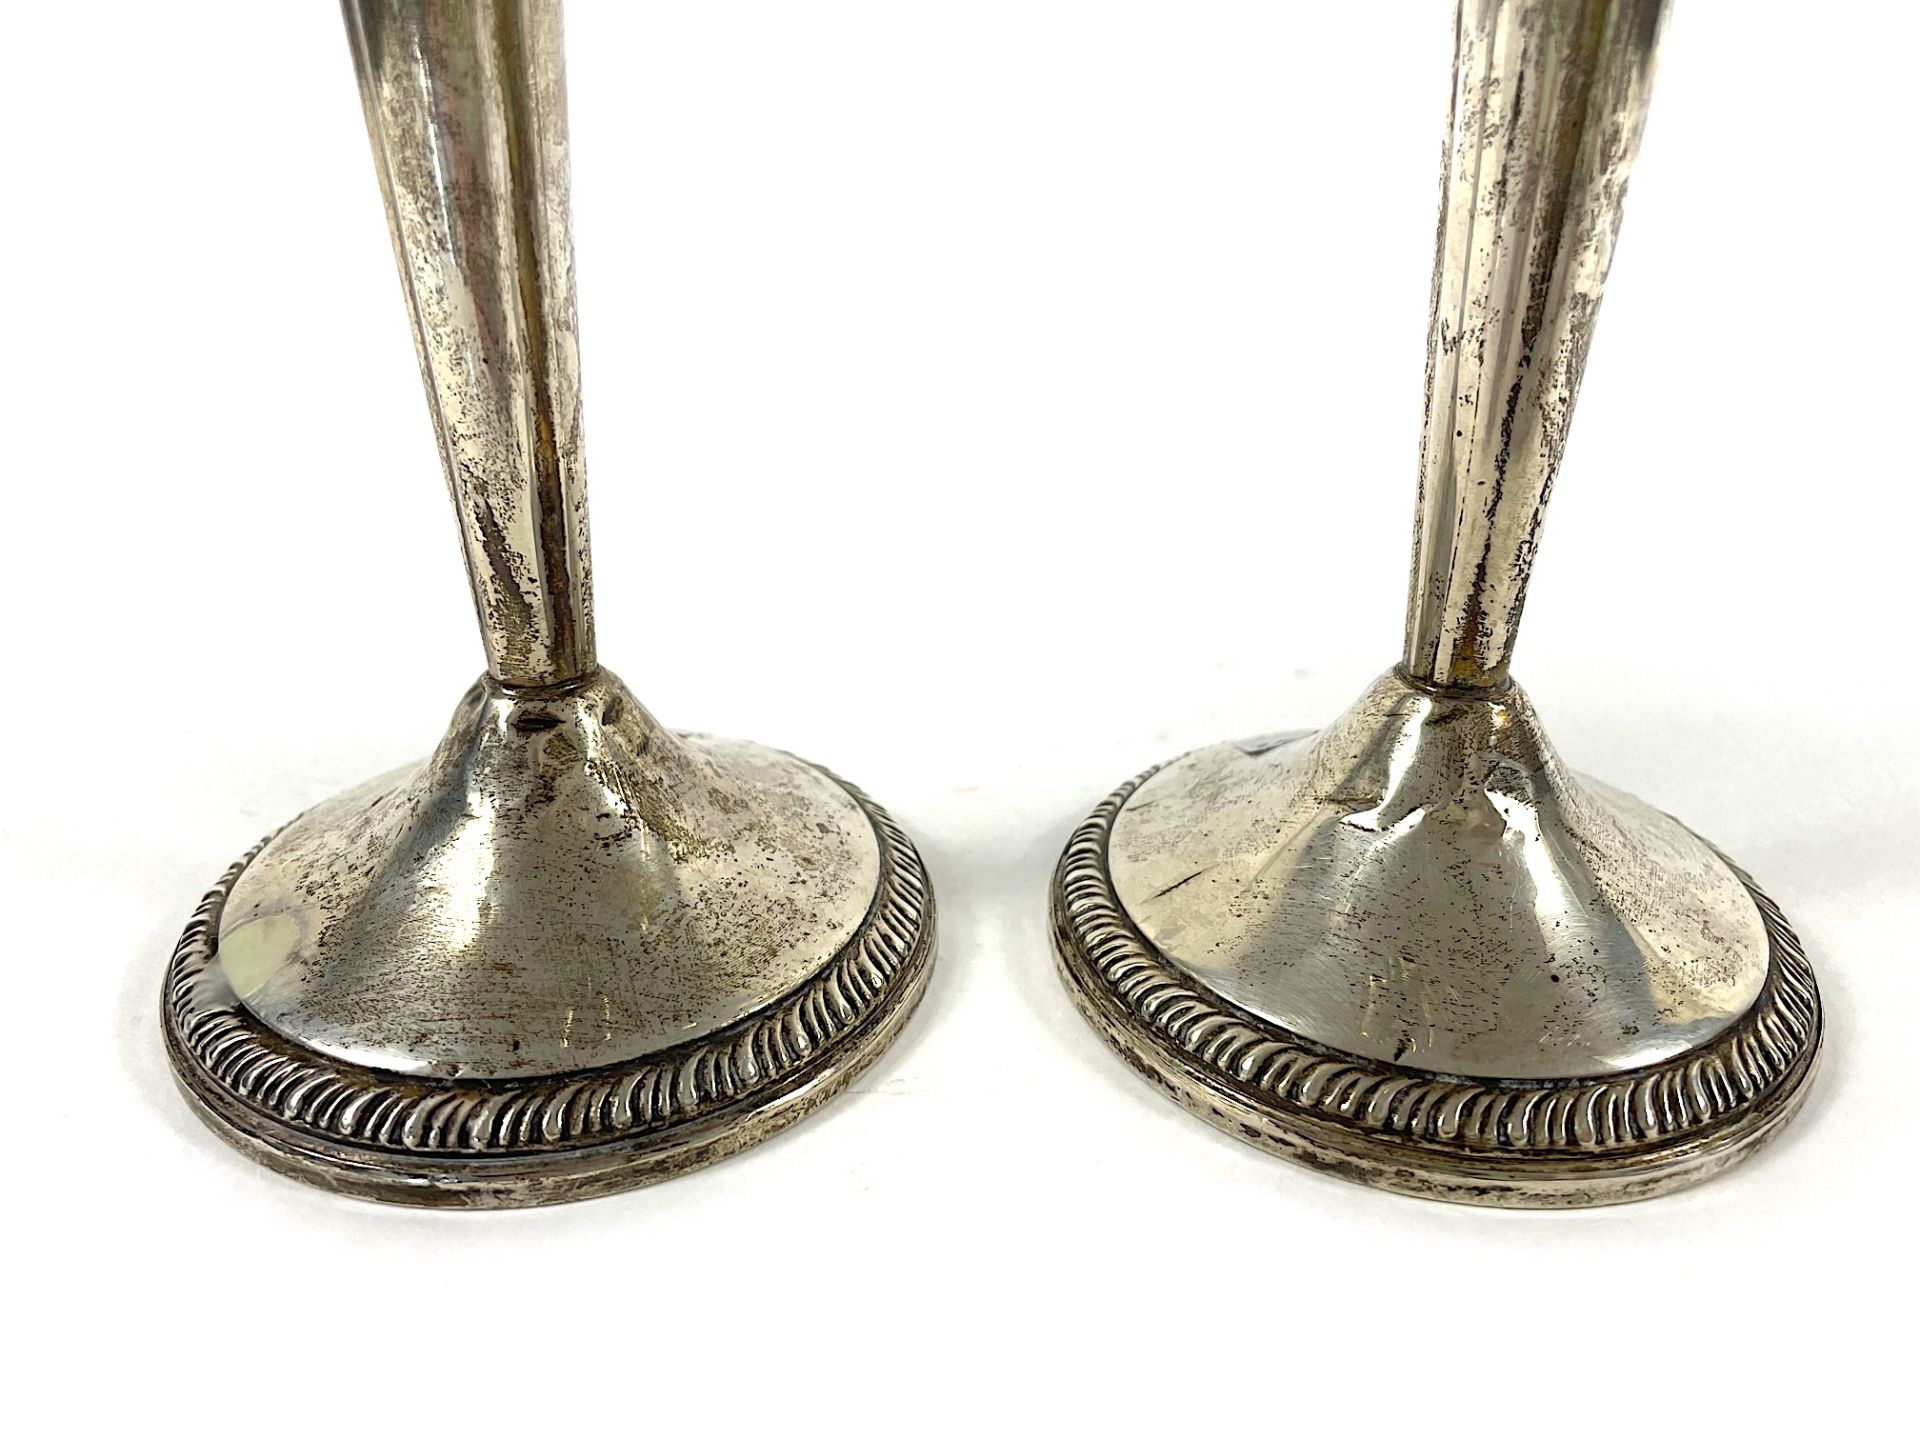 2 candlesticks in 925 silver - Image 7 of 11